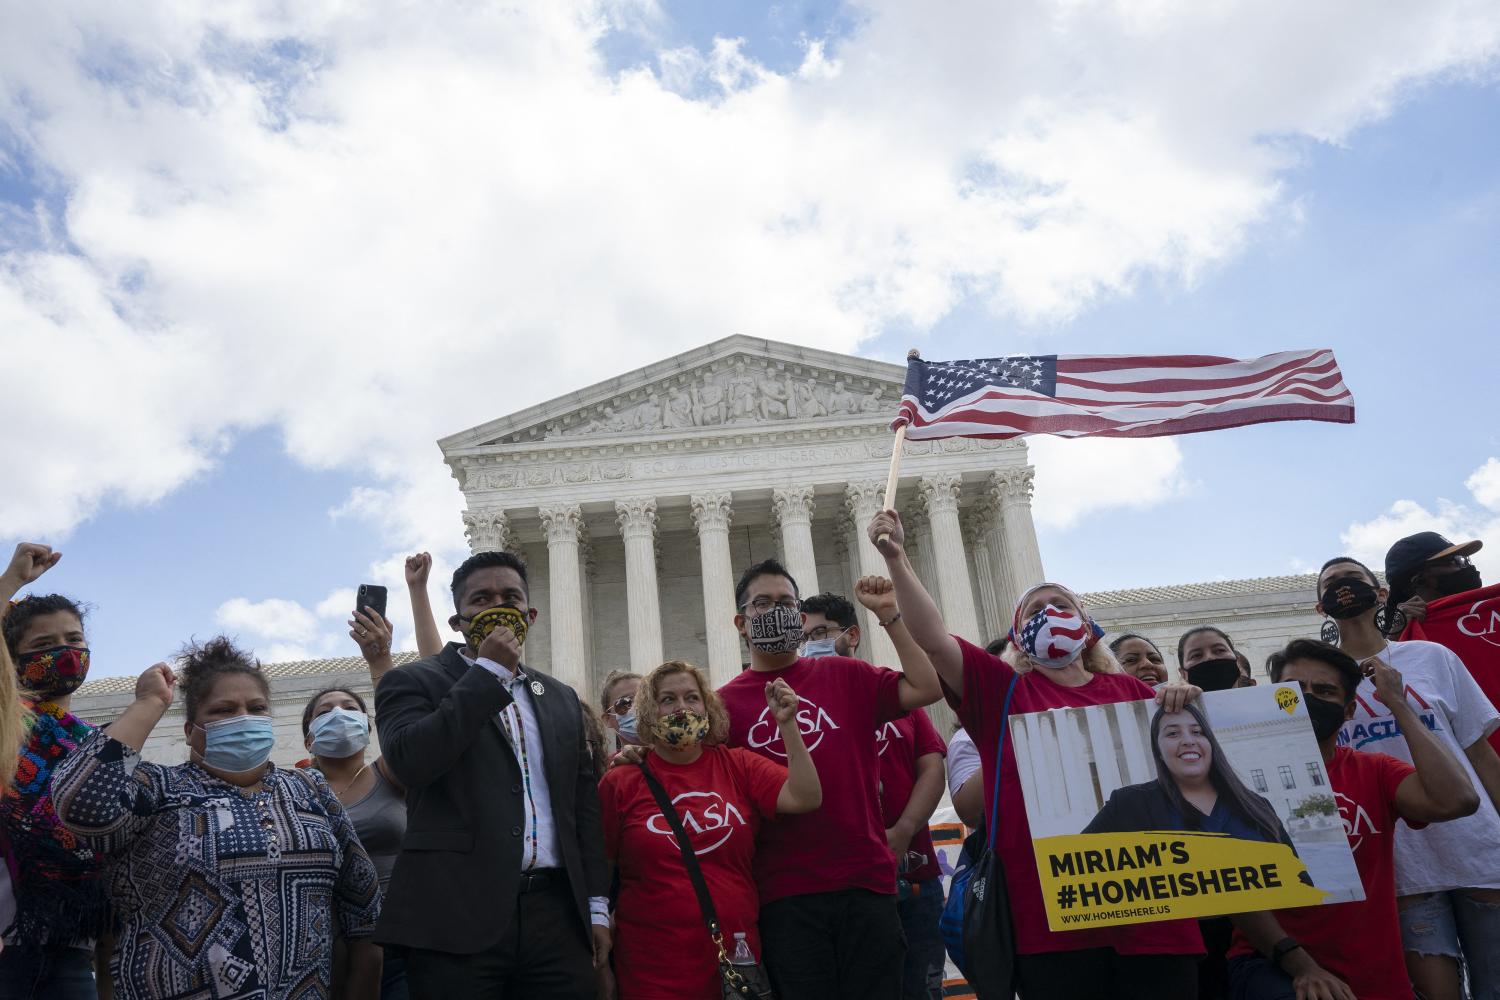 A group of people rally outside the United States Supreme Court in Washington, DC, USA on Thursday, June 18, 2020. The Court ruled on Thursday that United States President Donald J. Trump could not immediately end the DACA program. Photo by Stefani Reynolds/CNP/ABACAPRESS.COM